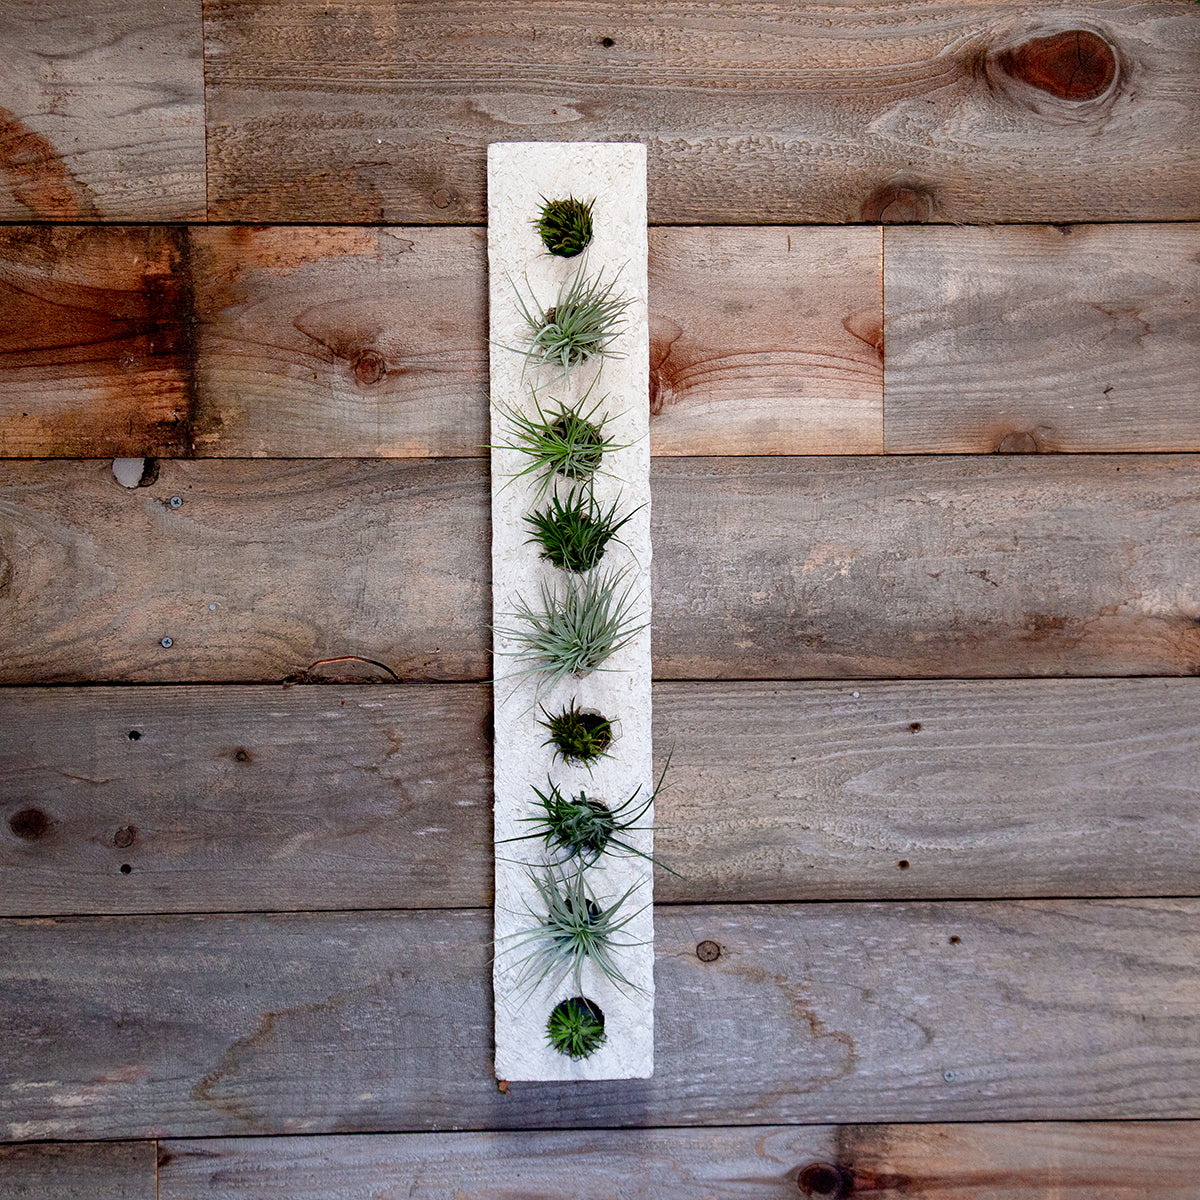 Air plant sconces are a beautiful modern way to display all varieties of air plants. This mancala is an elegant bone color, fits in the palm of both hands and has the feel and texture of stone but is ultra lightweight. Perfect for creating a vertical dry garden, hang or place on any surface indoors or out. Air plants Included. Send living arrangements instead of cut flowers.